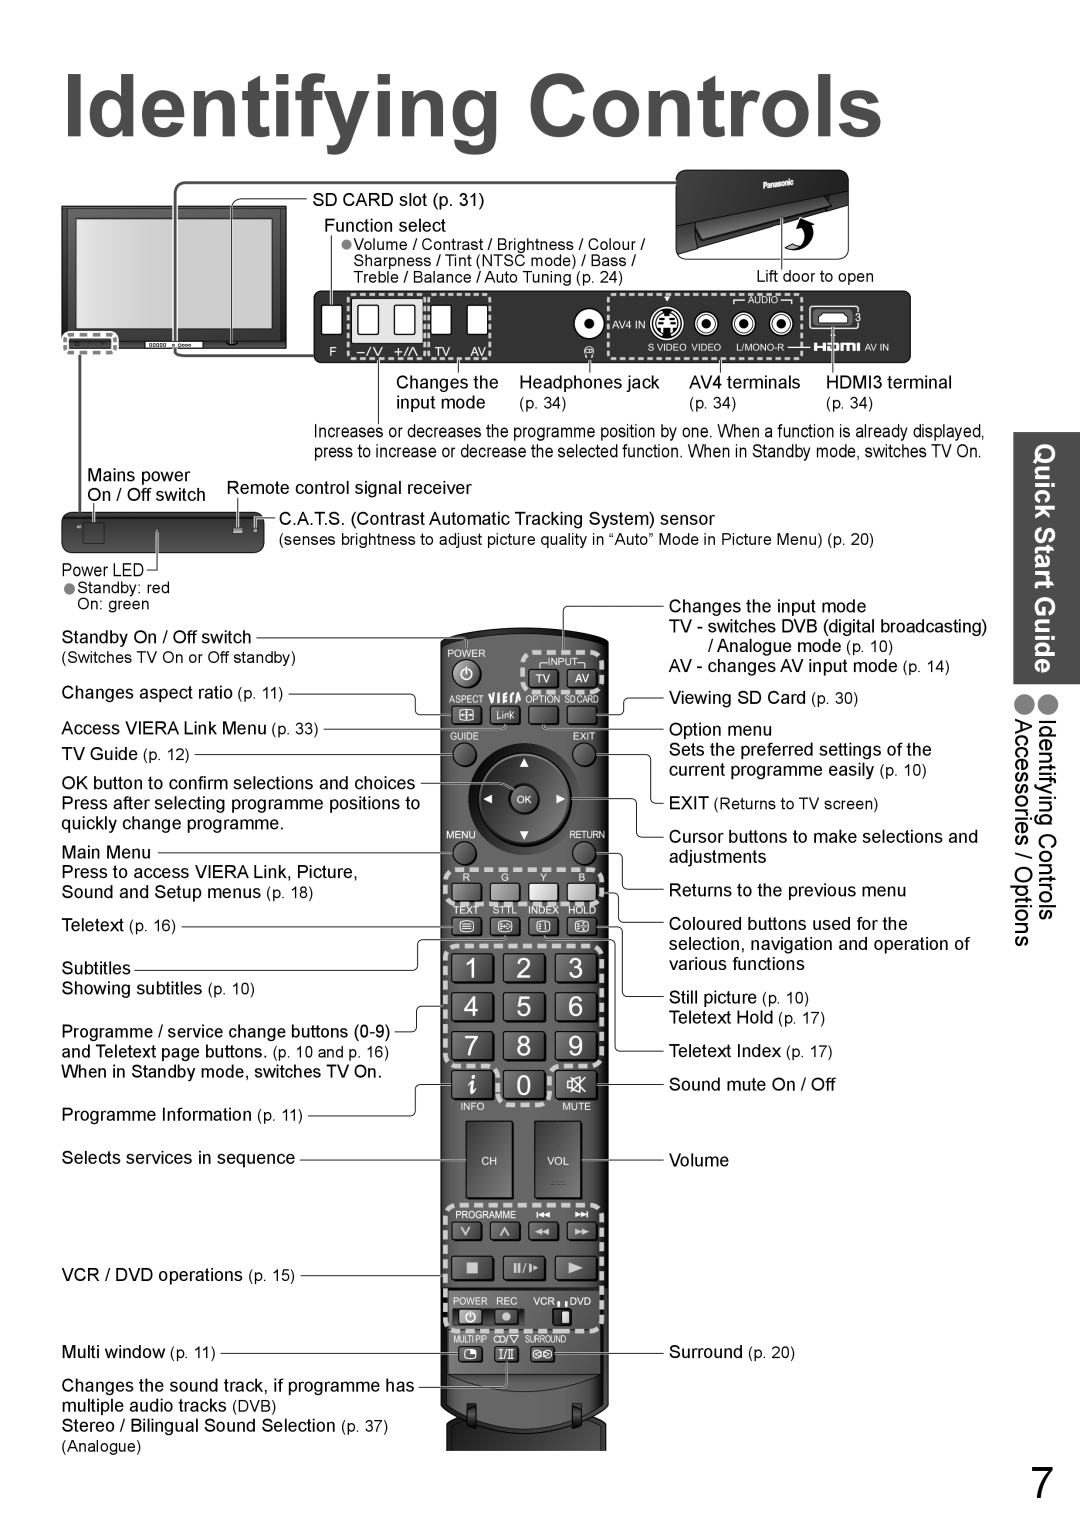 Panasonic TH-42PZ700A, TH-50PZ700A Quick Start Guide Identifying Controls Accessories, Programme Information p 